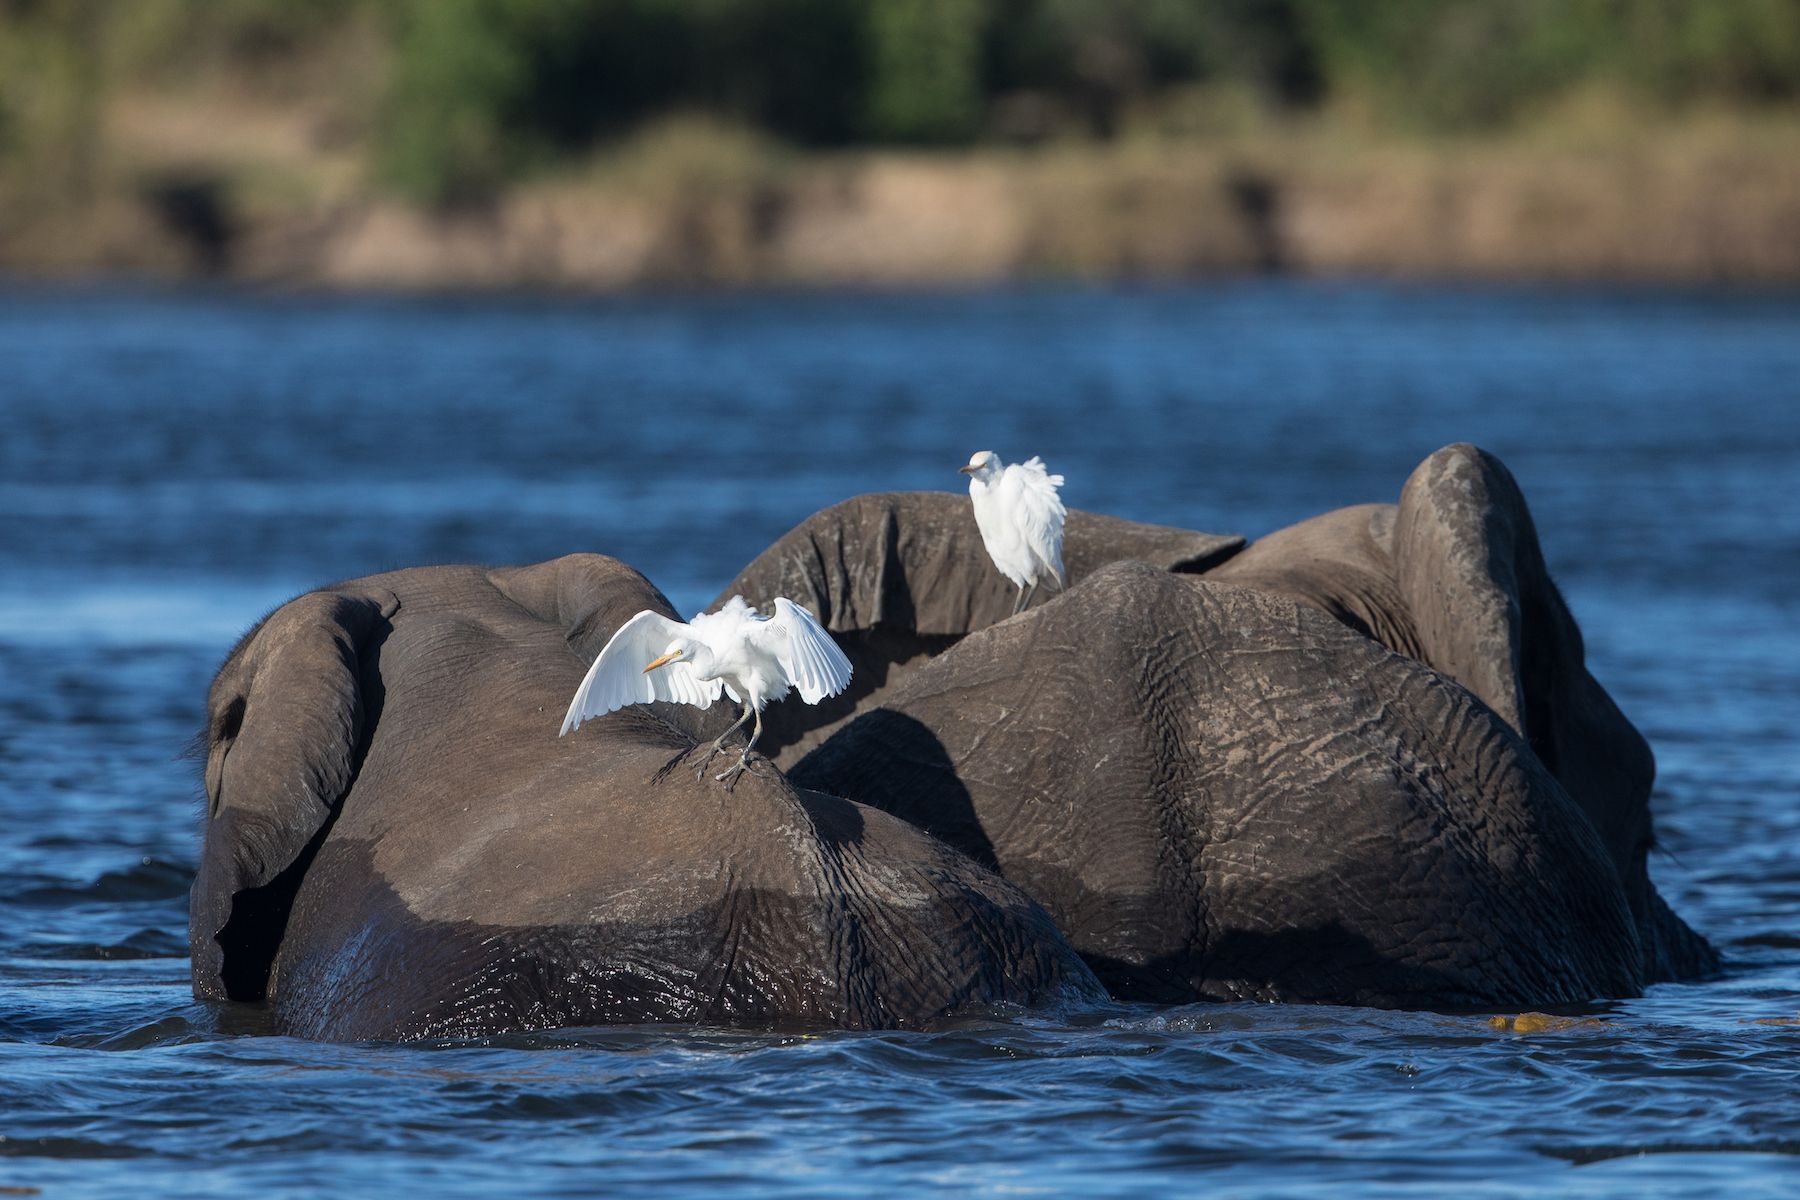 African Elephants swimming the Chobe provide a perch for Cattle Egrets